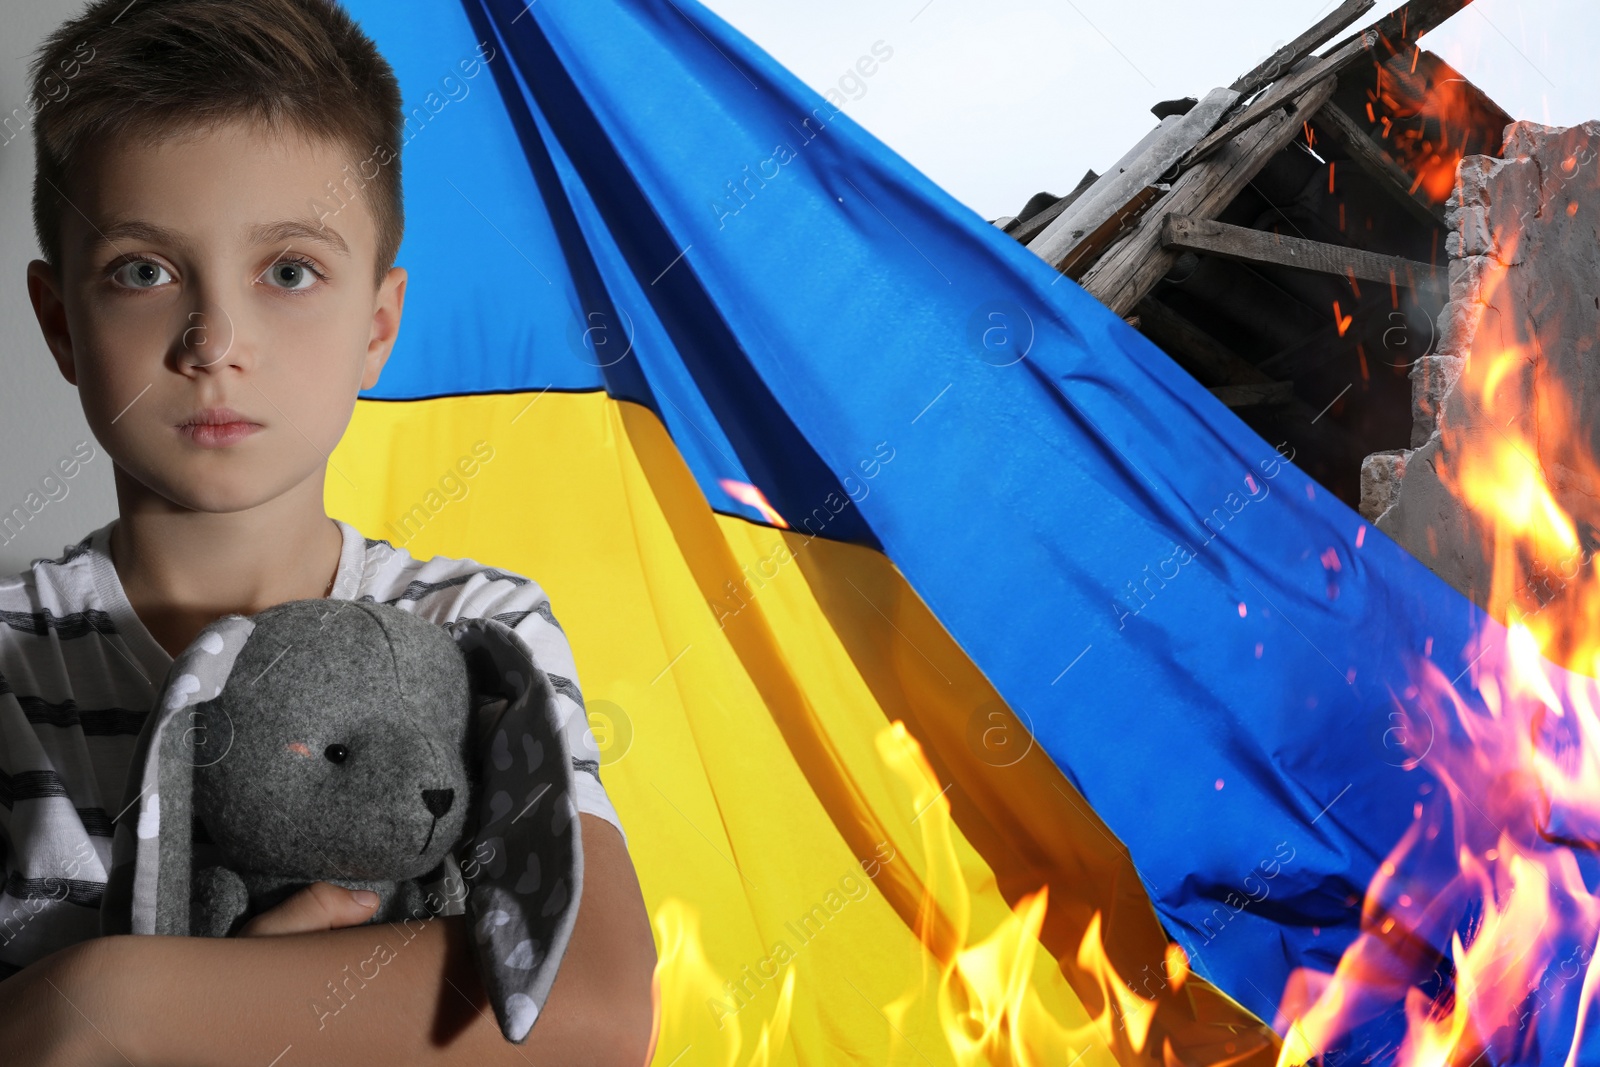 Image of Sad little boy with toy, national flag and ruined house on fire. Stop war in Ukraine